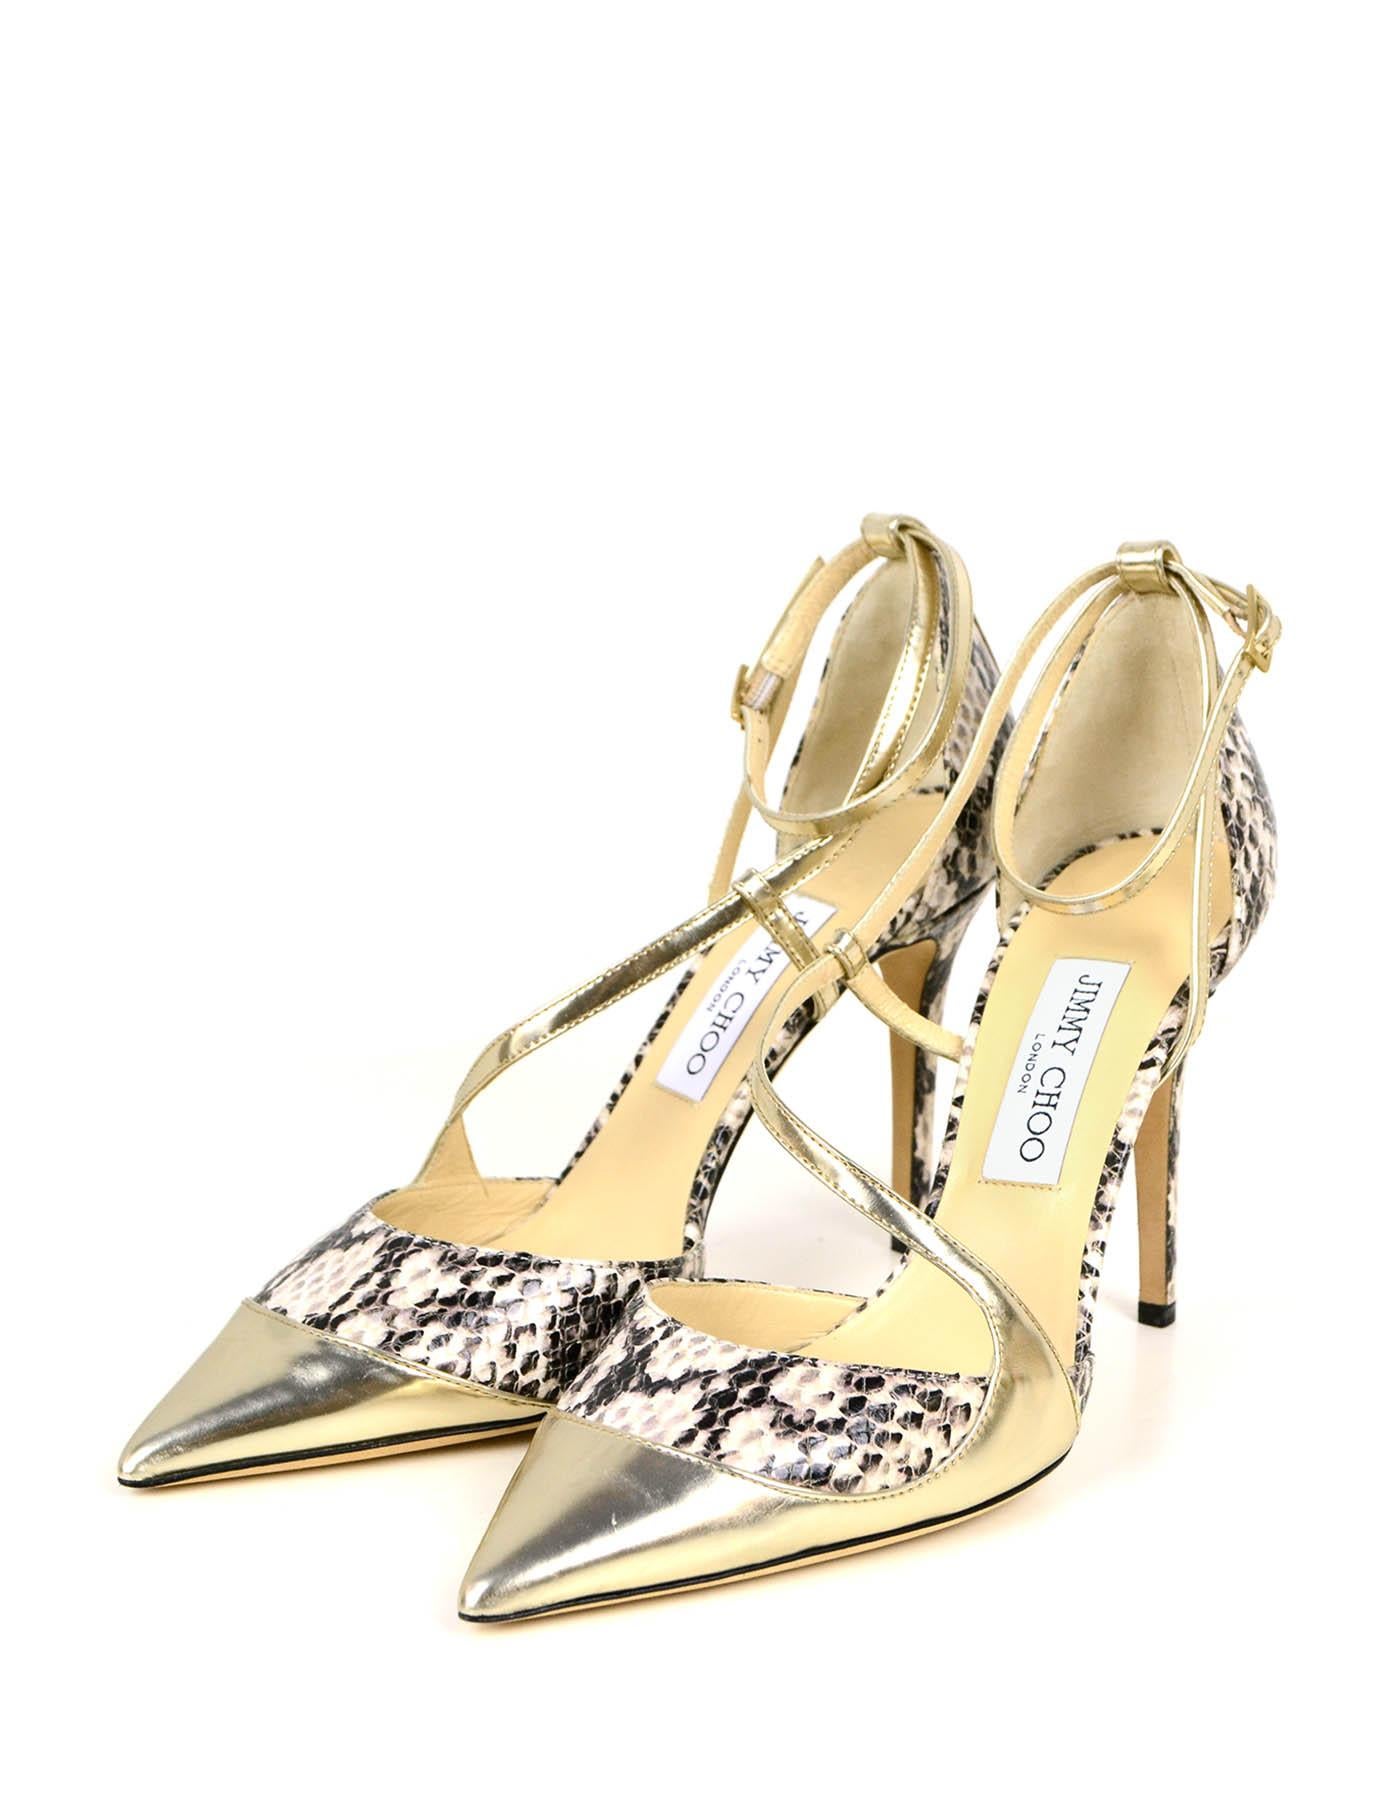 Jimmy Choo NEW Snakeskin & Leather Point Toe Strappy Heels

Made In: Italy
Color: Gold metallic, black, tan
Hardware: Buckle
Materials: Snakeskin, leather
Closure/Opening: Ankle strap
Overall Condition: Excellent, never worn.  A couple small